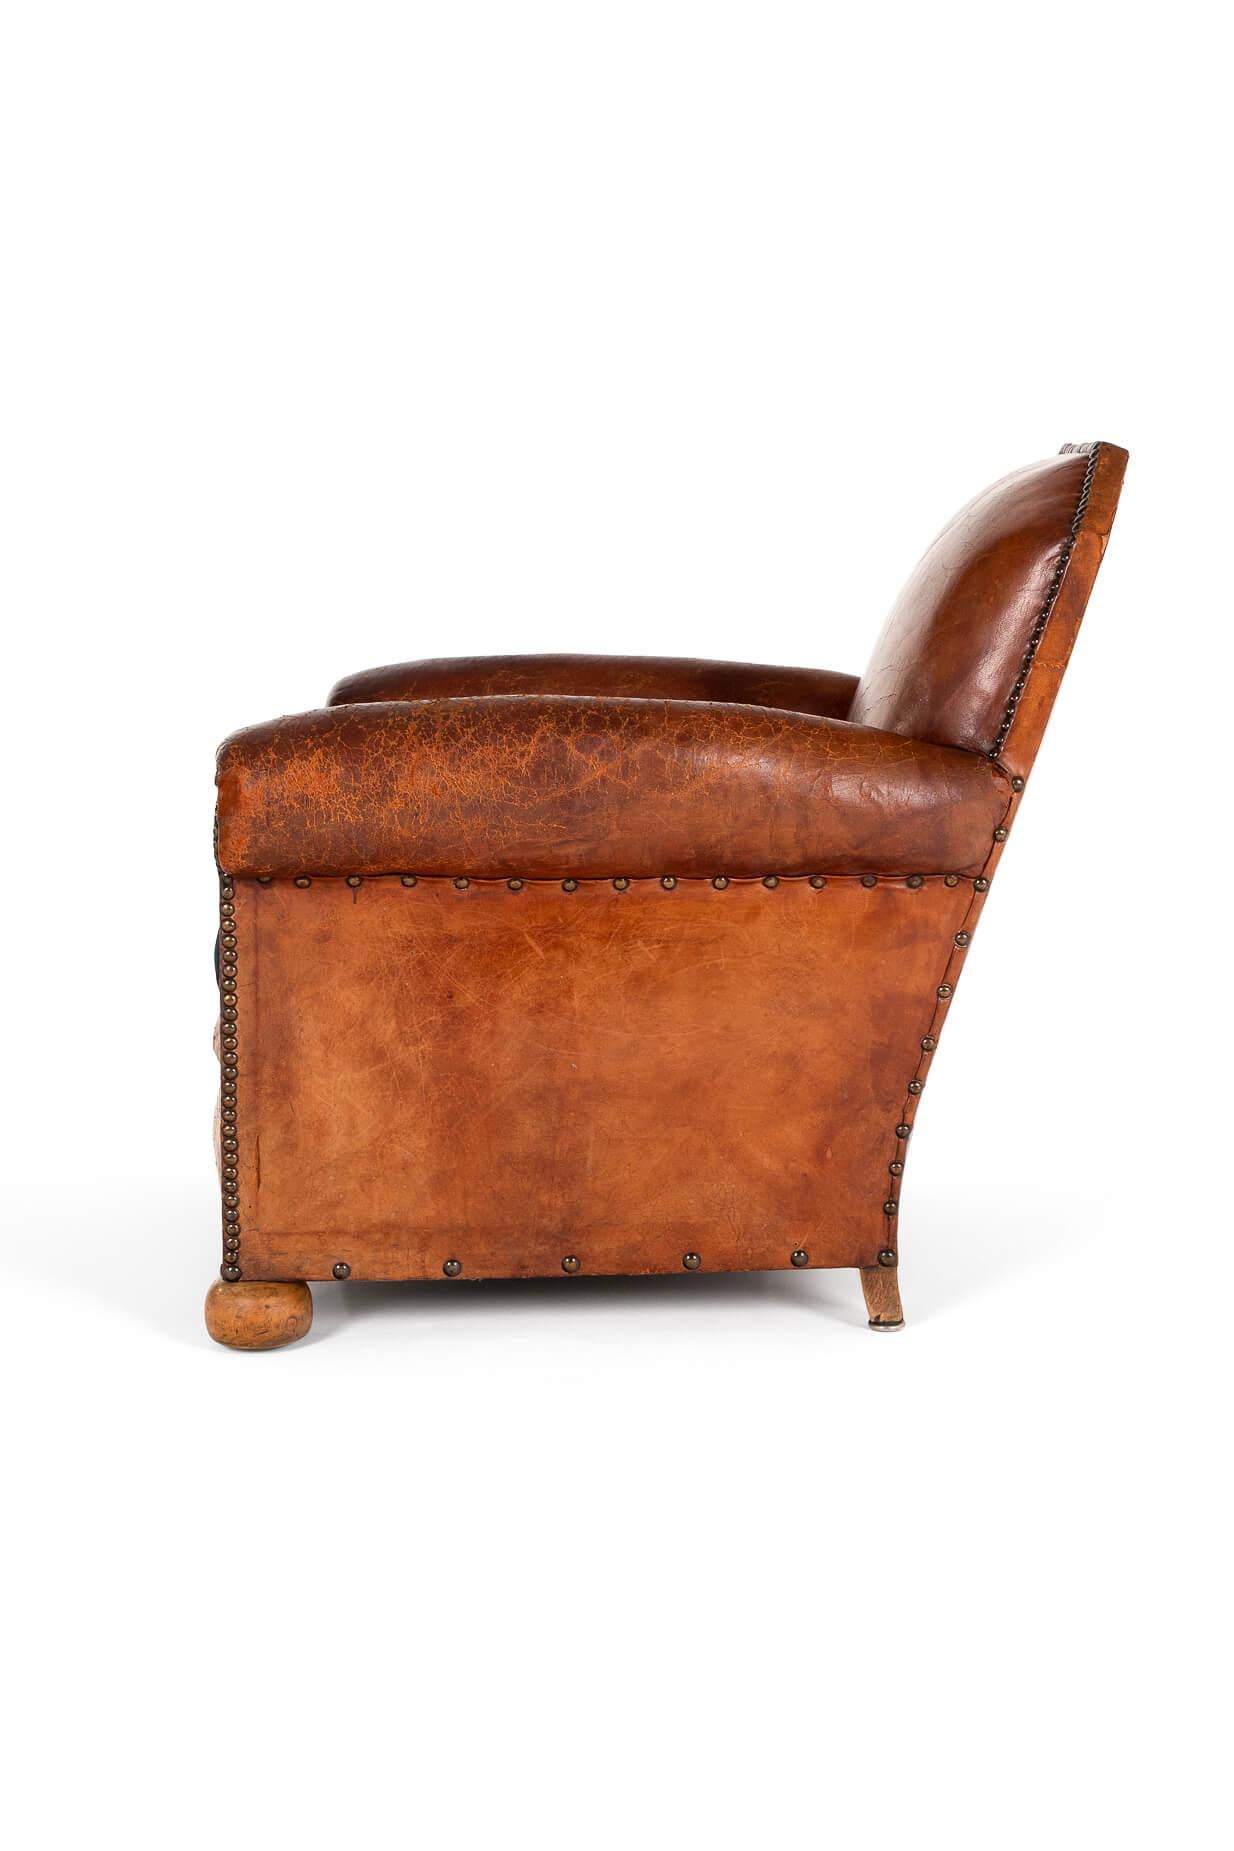 Art Deco Large Leather French Club Chair